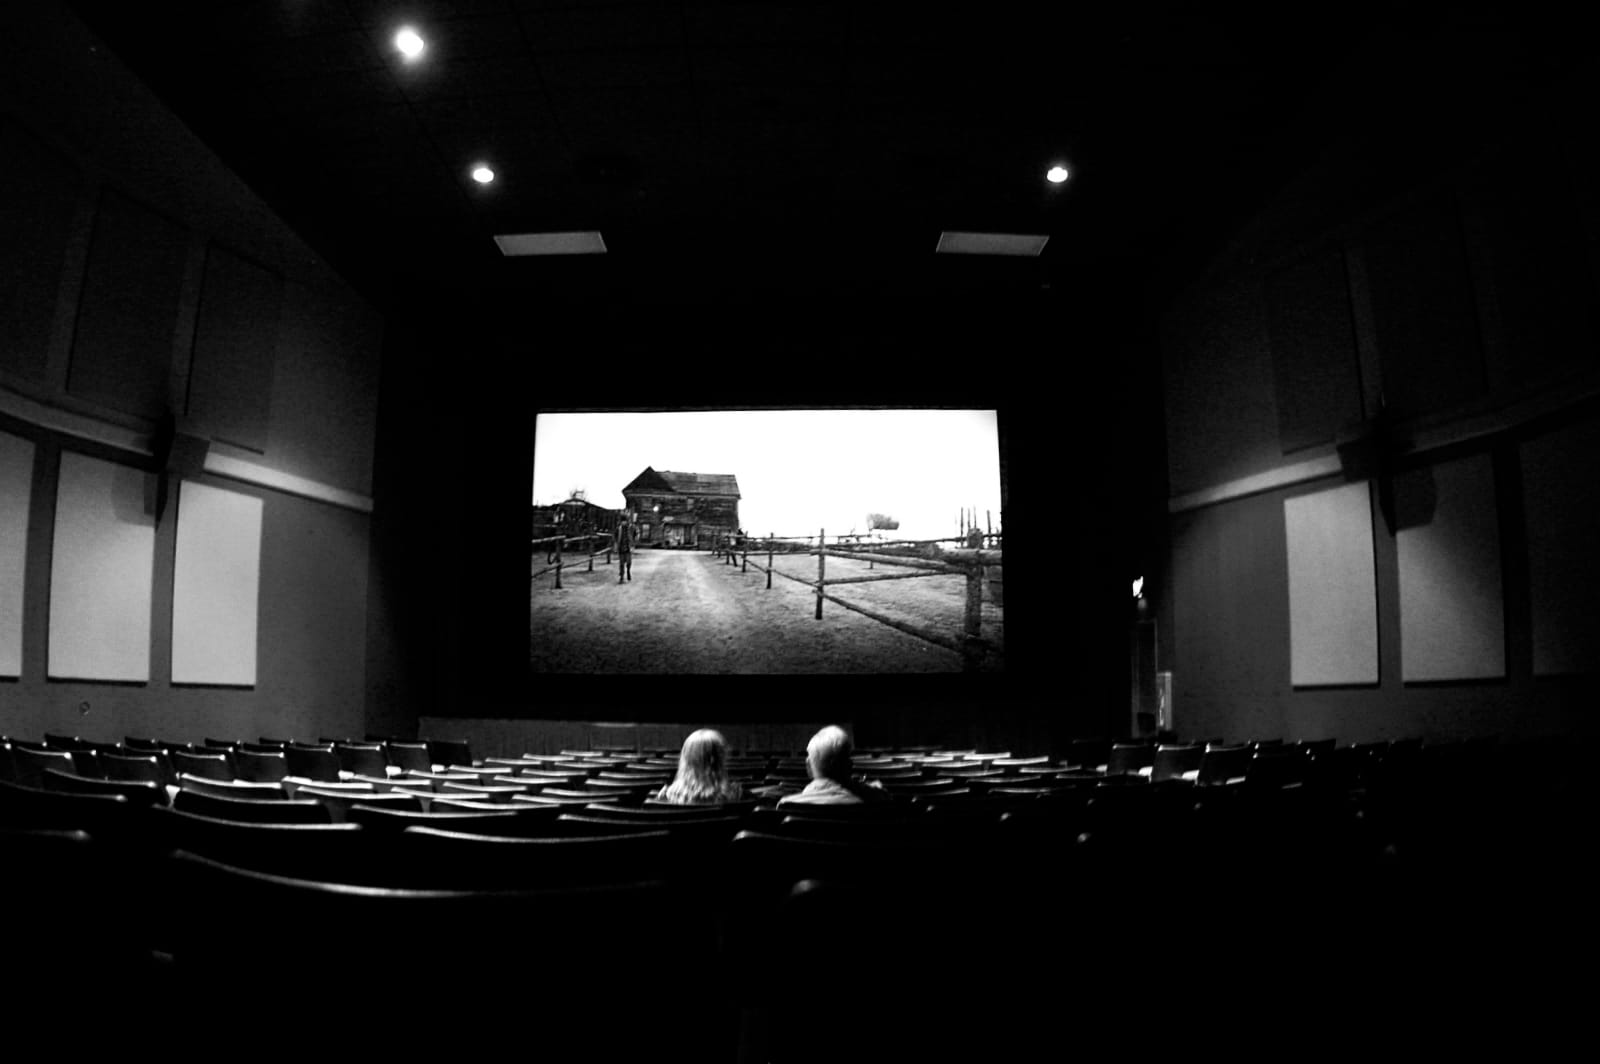 black and white image of a darkened movie theater with just two patrons watching what appears to be a bleak Western scene